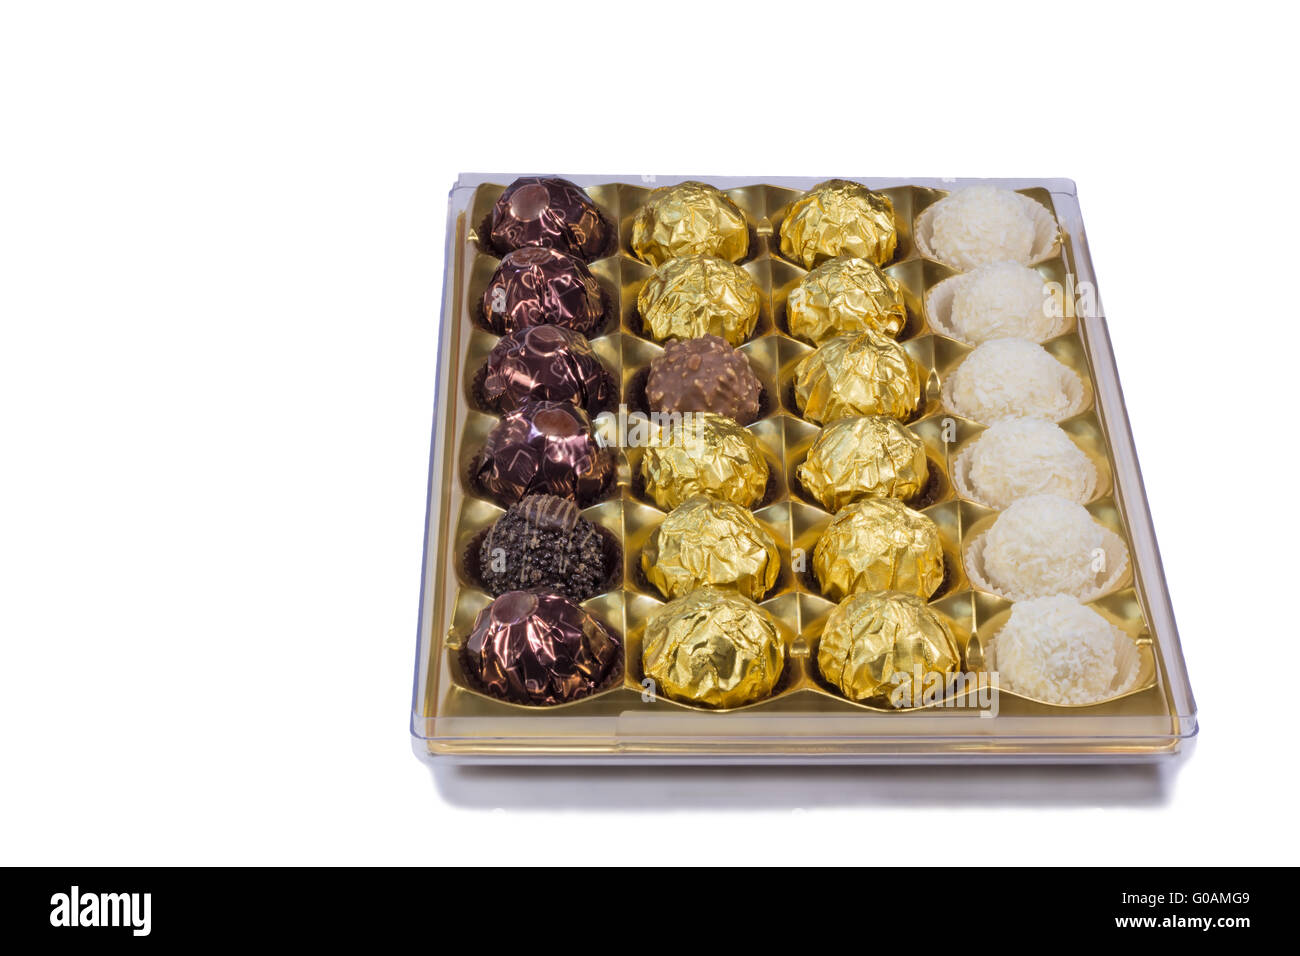 Chocolate sweets in the box on the white backgroun Stock Photo